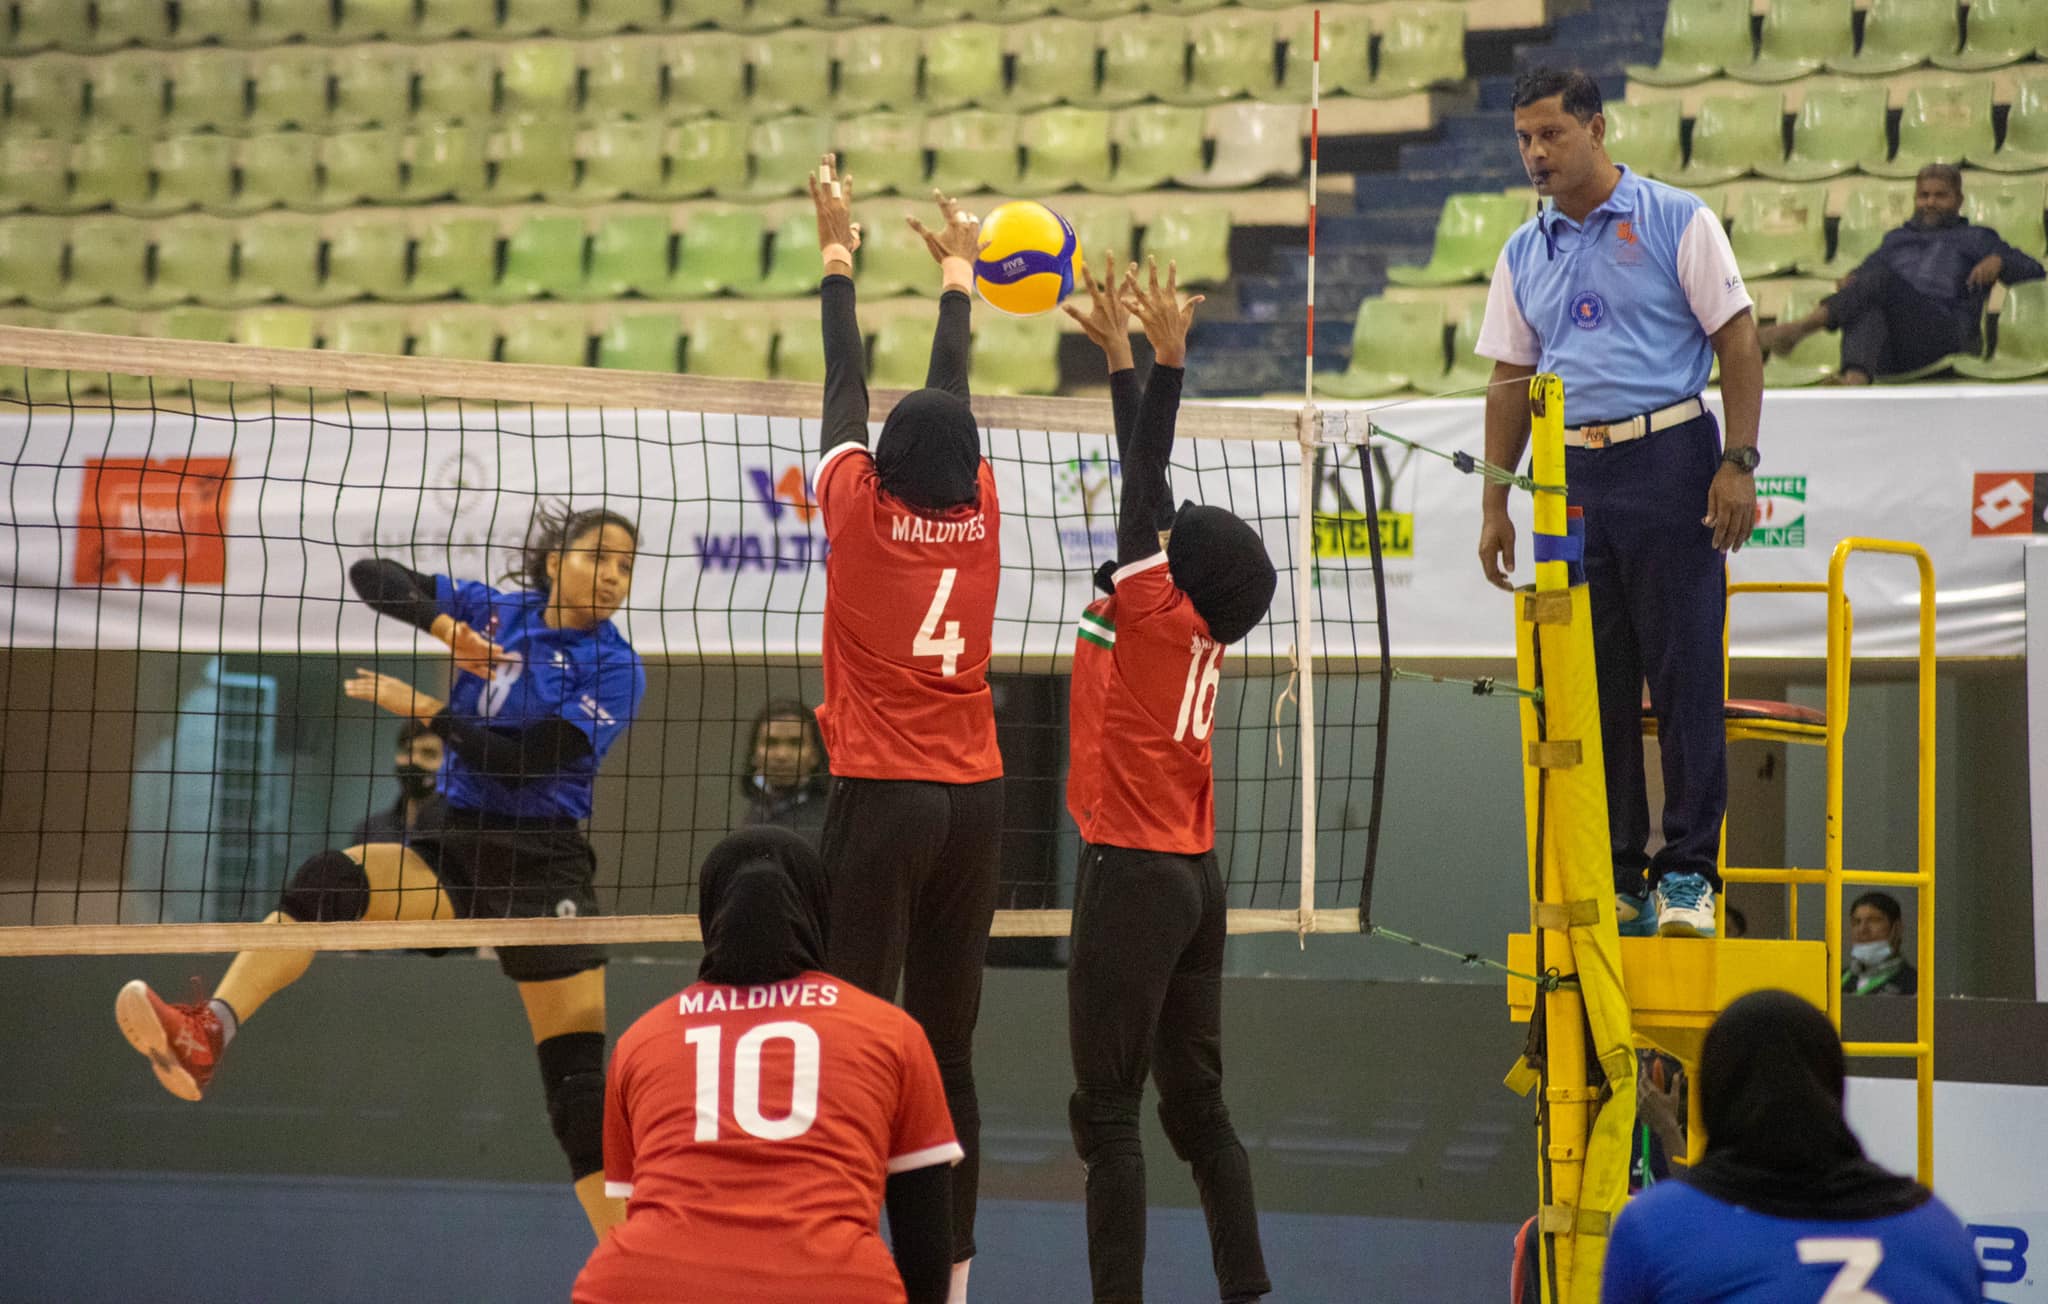 Nepal defeats Maldives, registers second consecutive win in AVC Asian Central Volleyball Championship